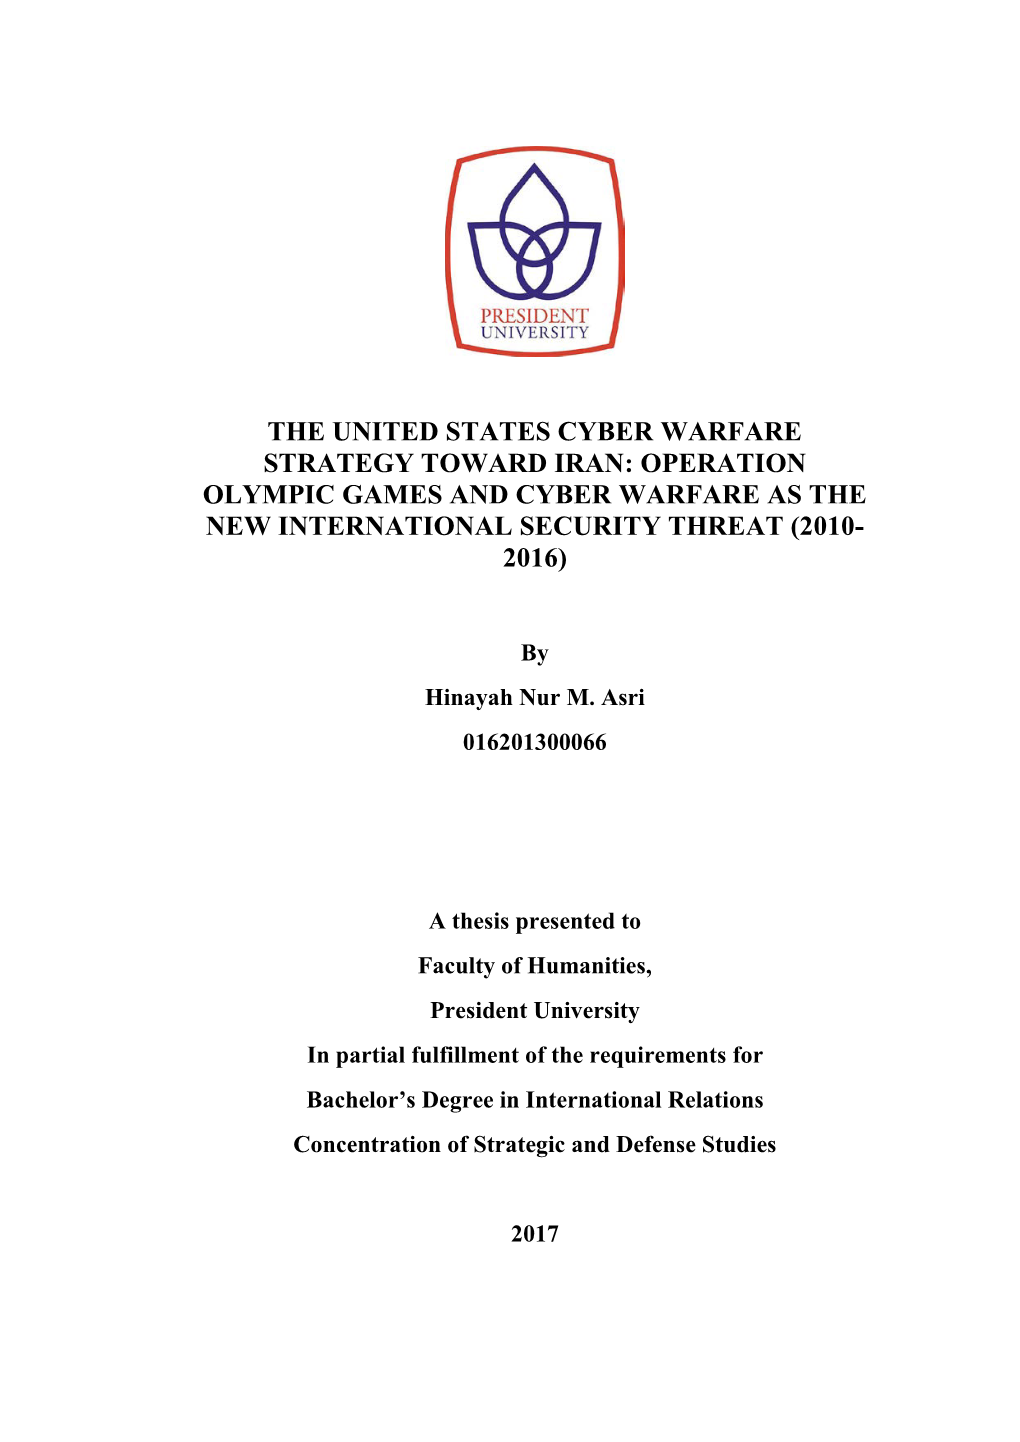 The United States Cyber Warfare Strategy Toward Iran: Operation Olympic Games and Cyber Warfare As the New International Security Threat (2010- 2016)